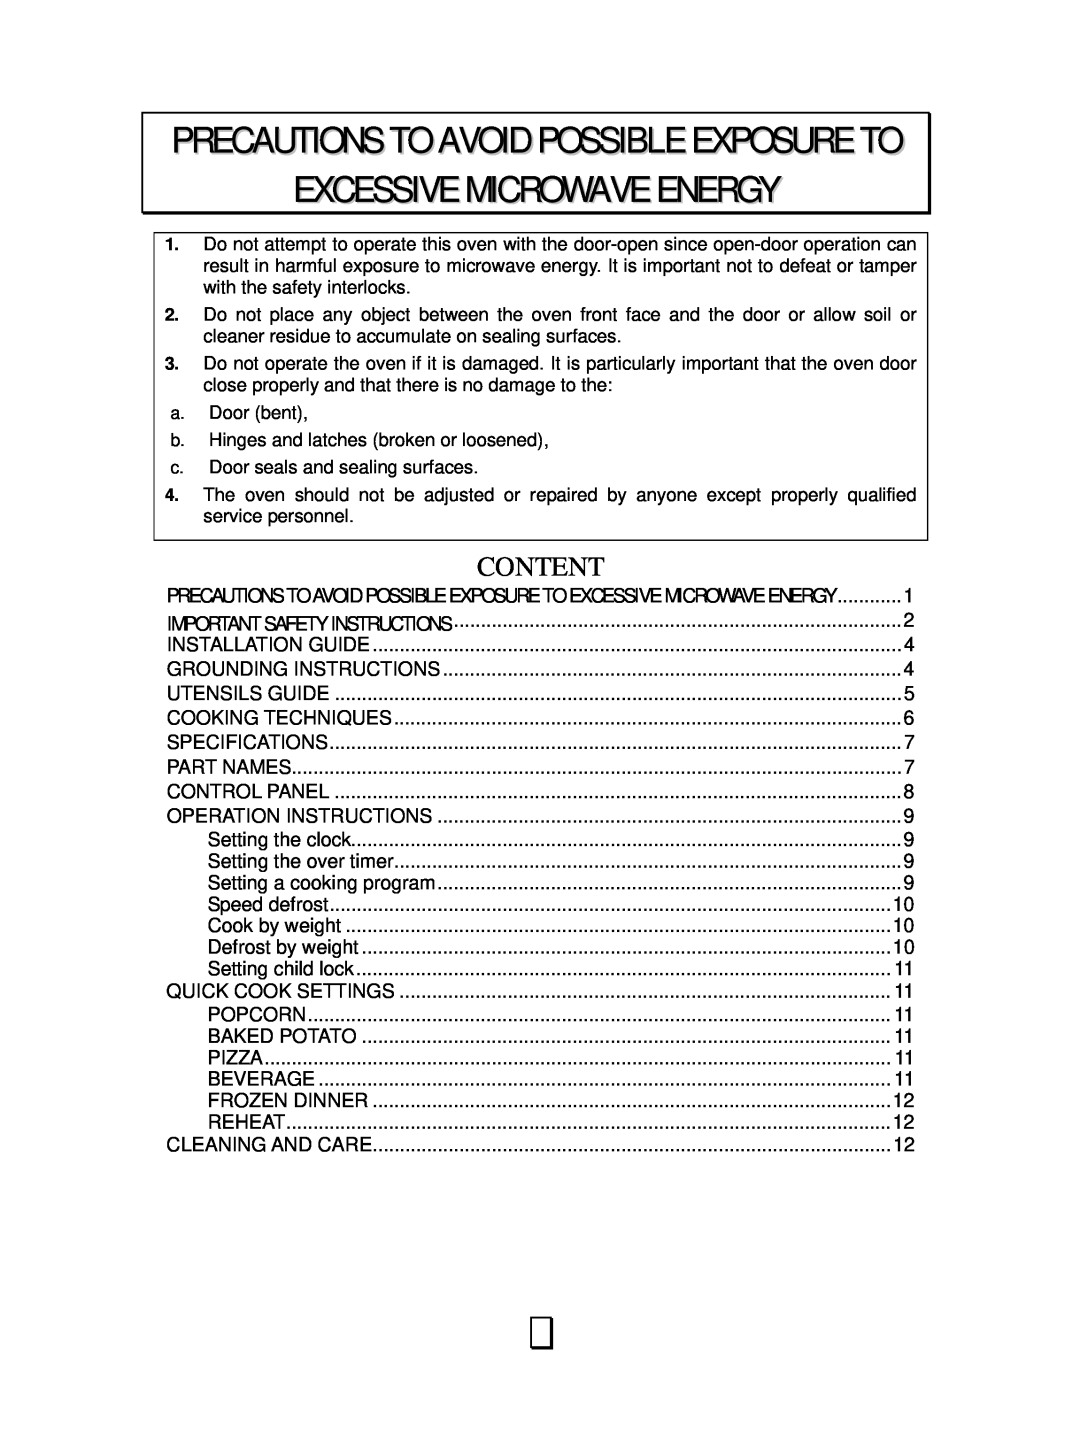 RCA RMW1143 owner manual Precautions To Avoid Possible Exposure To, Excessive Microwave Energy, Content 